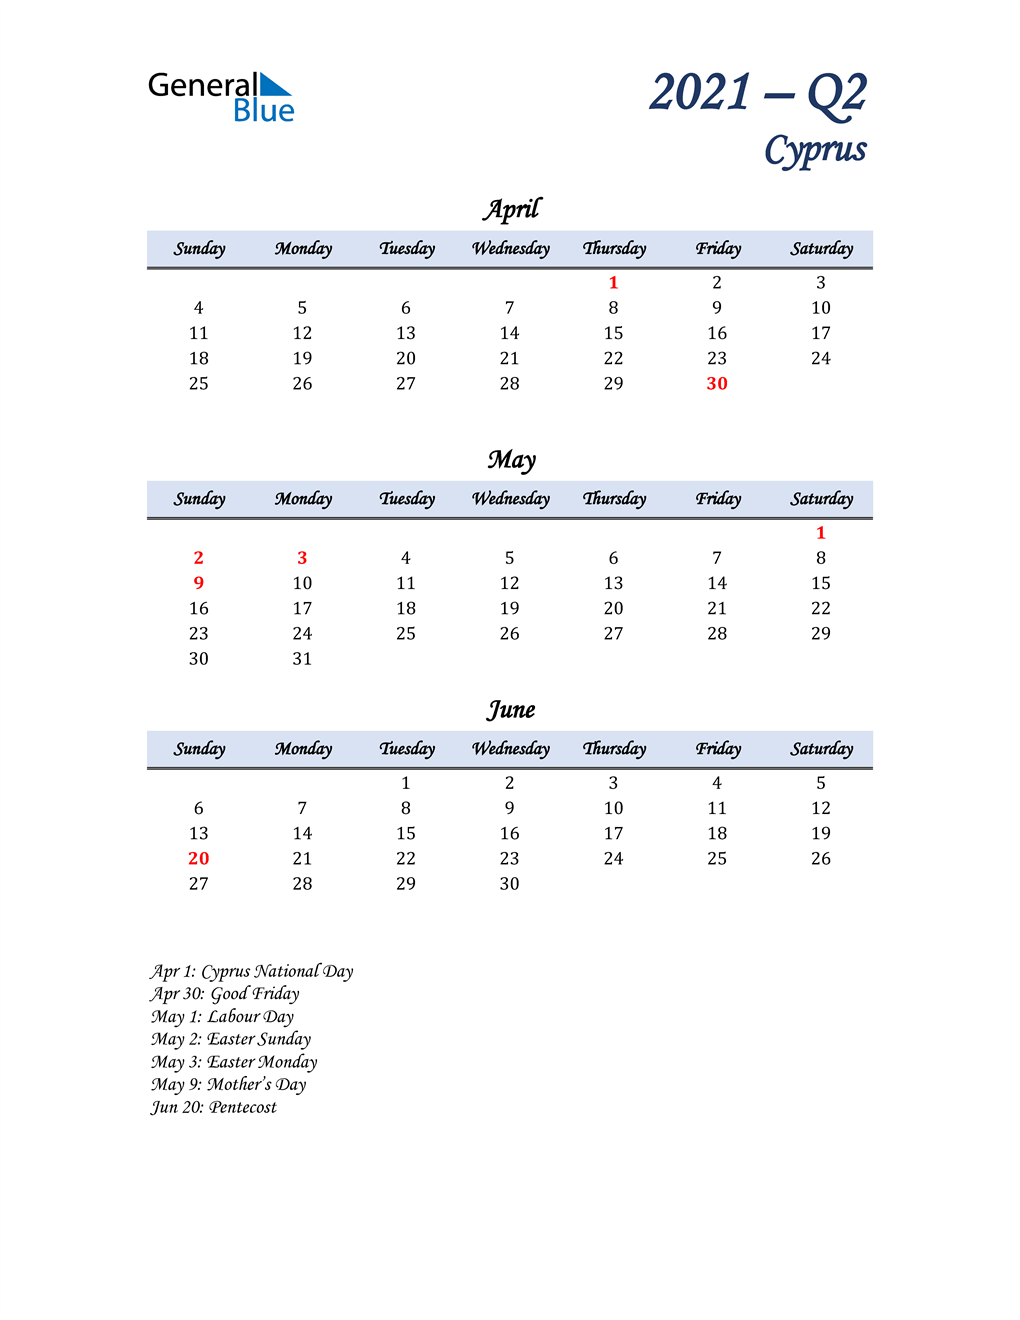  April, May, and June Calendar for Cyprus